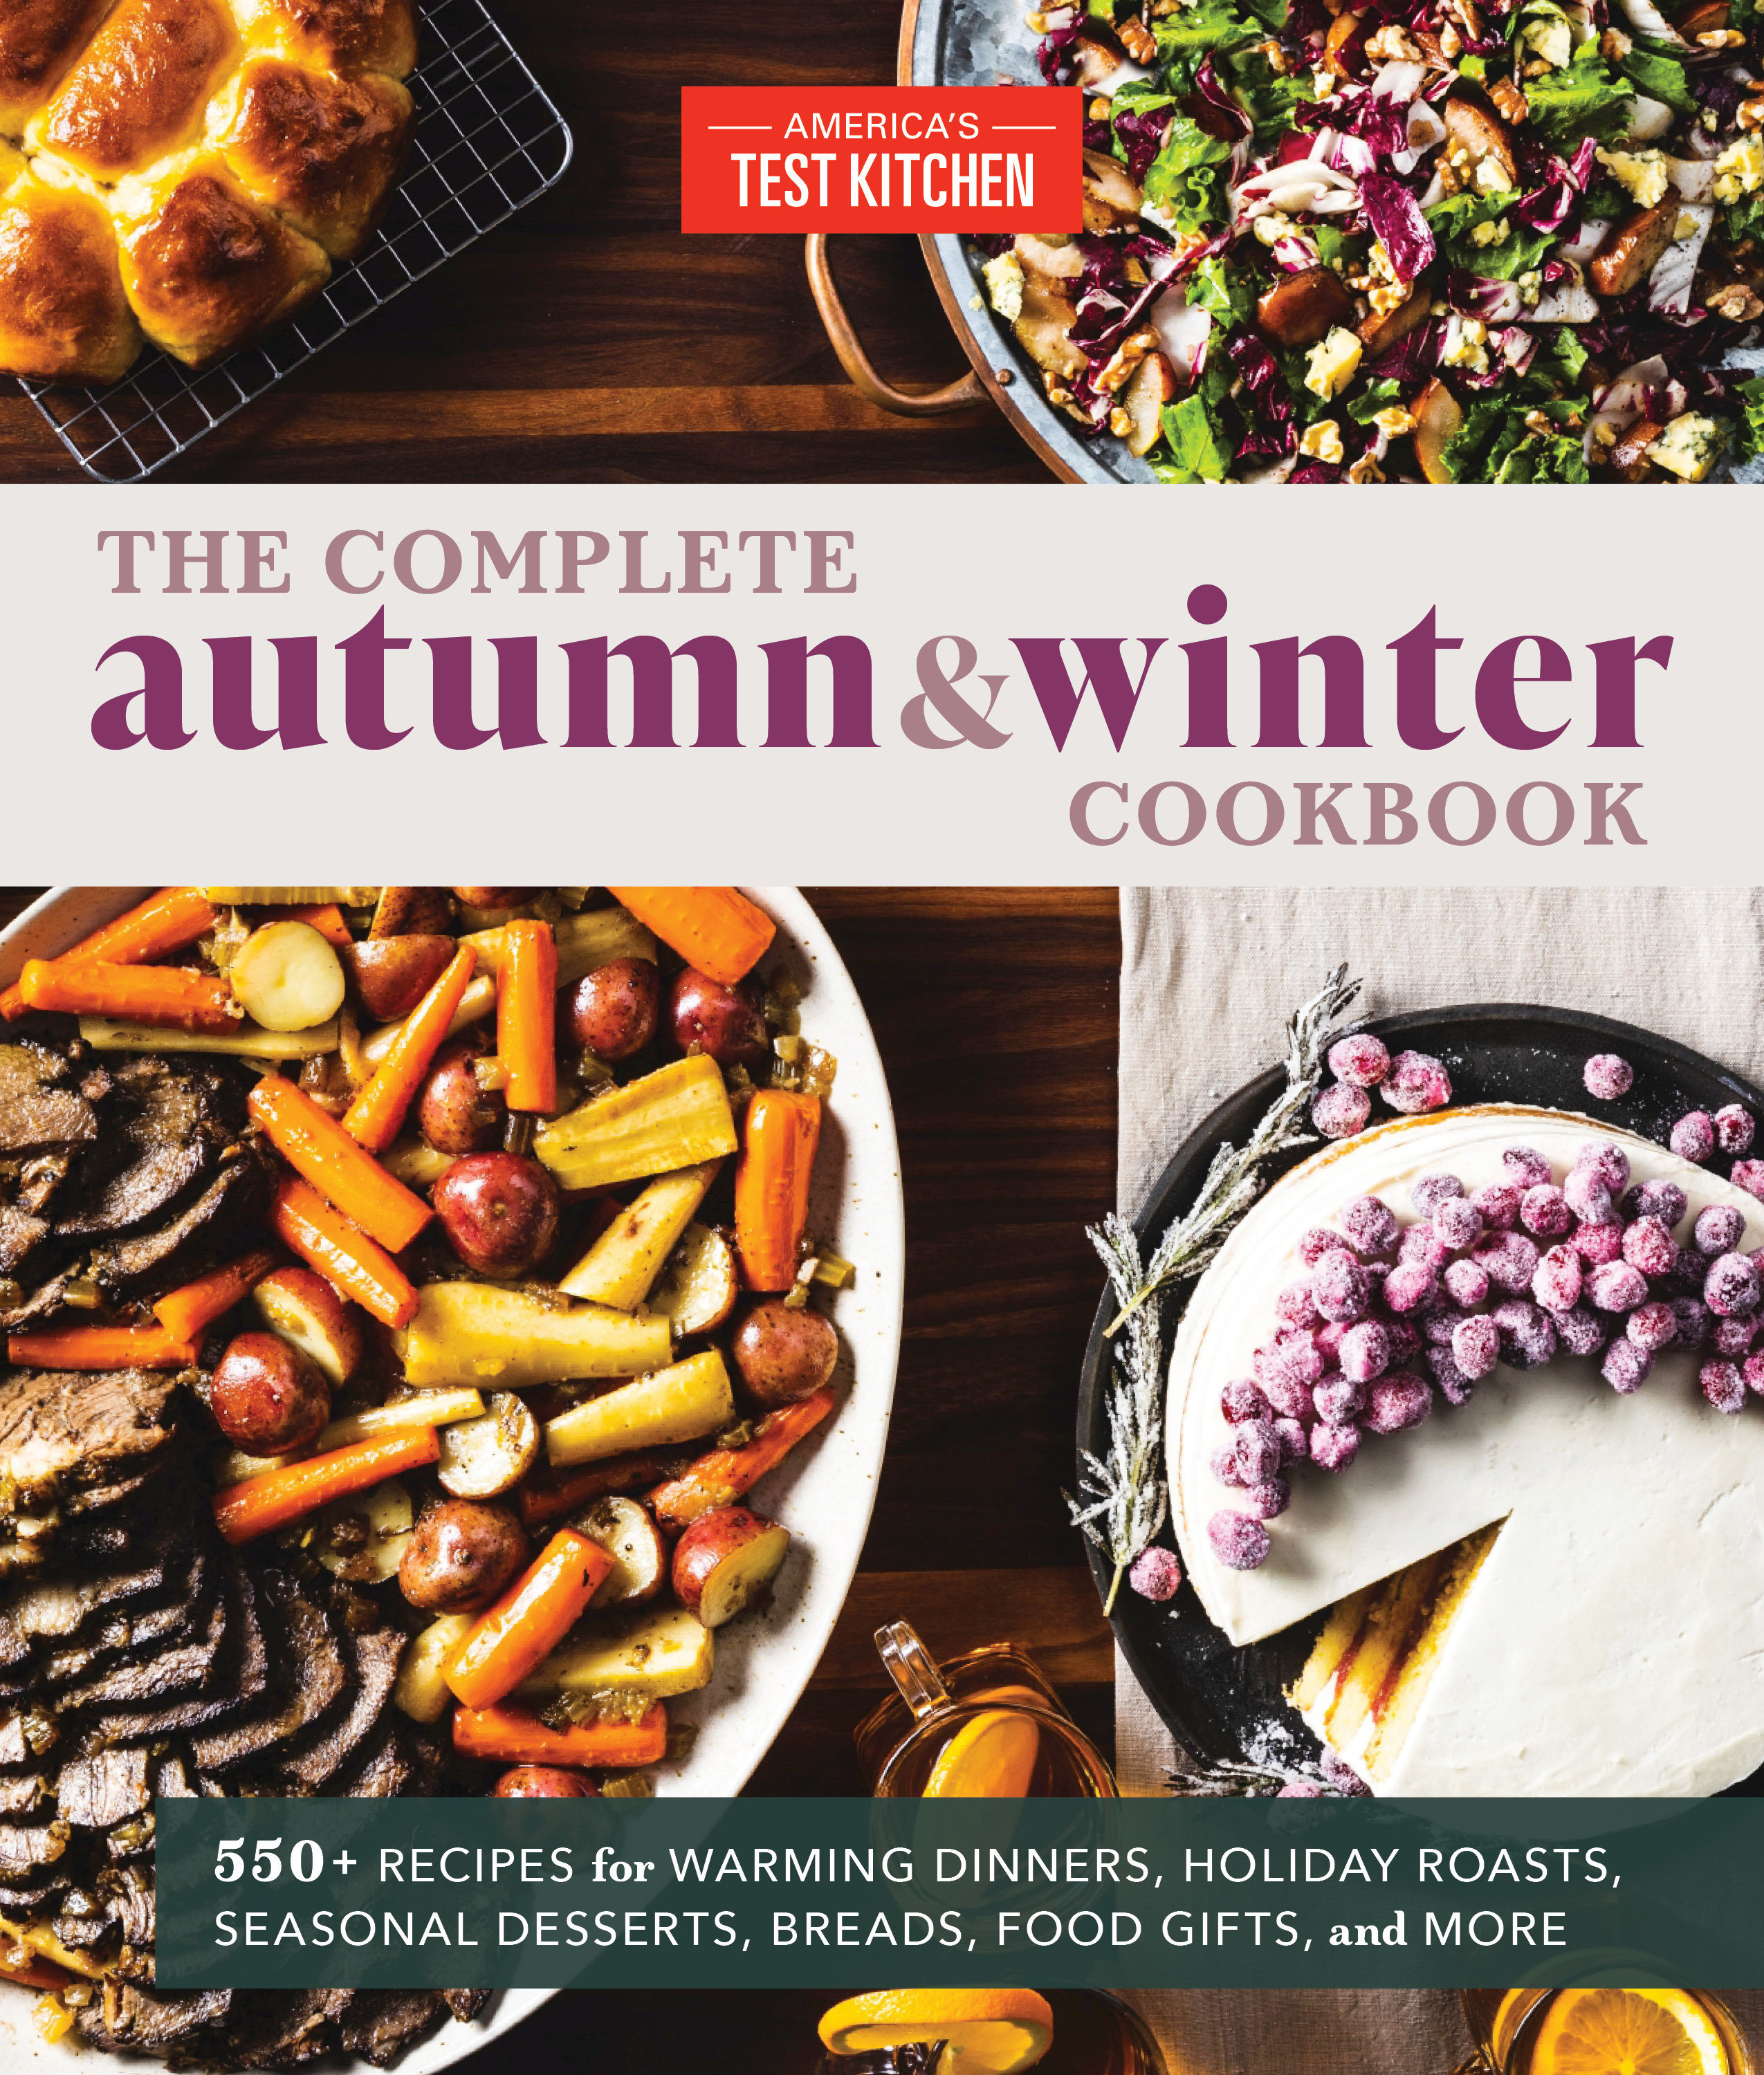 The Complete Autumn and Winter Cookbook 550+ Recipes for Warming Dinners, Holiday Roasts, Seasonal Desserts, Breads, Foo d Gifts, and More cover image